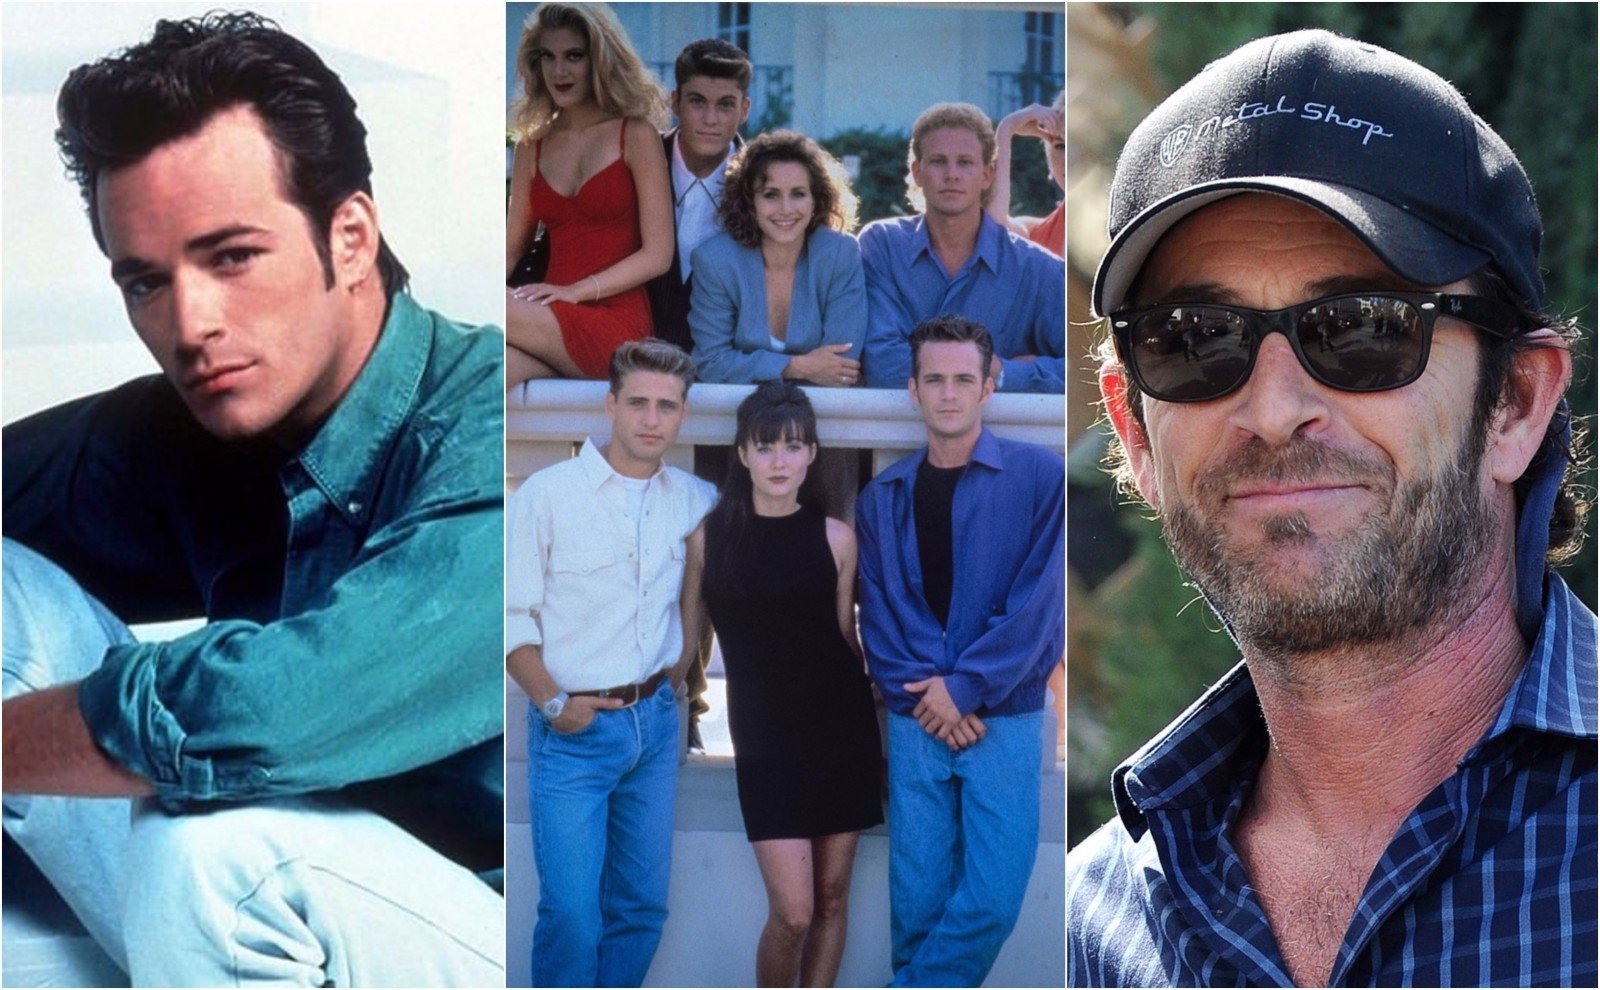 Luke Perry, actor of Beverly Hills, 90210, died in the hospital – Navva1600 x 990